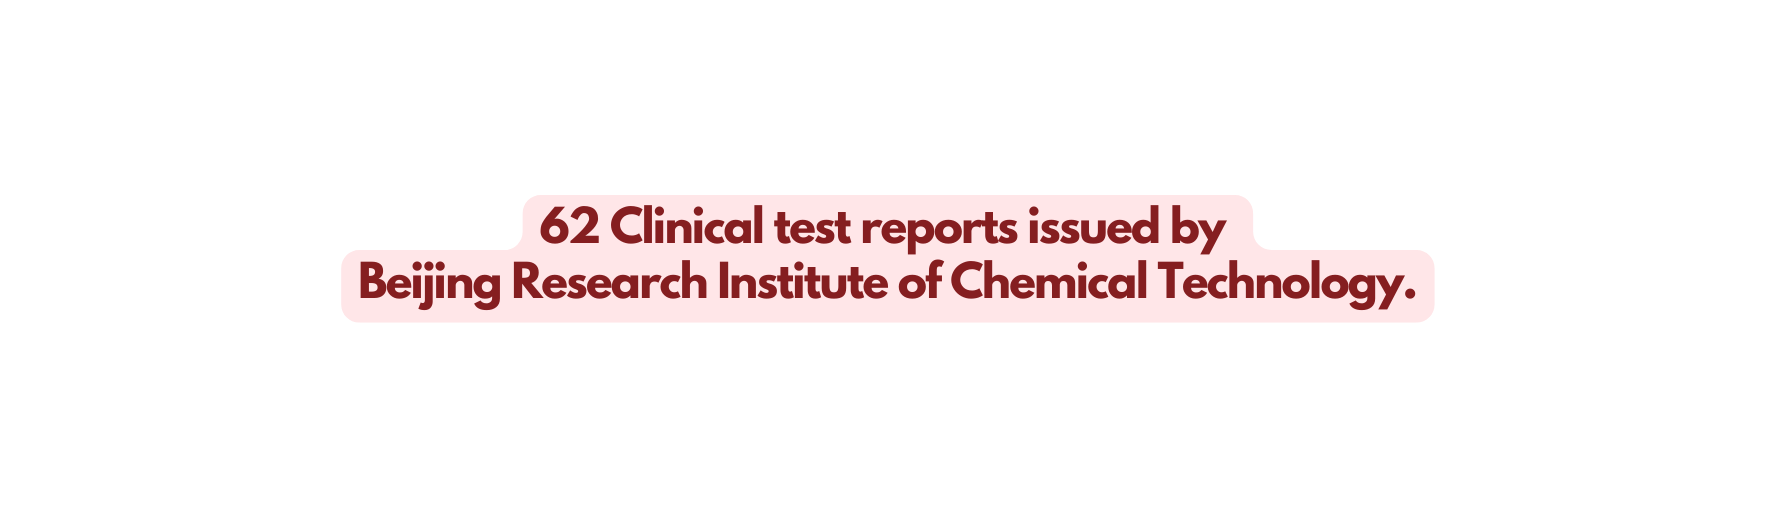 62 Clinical test reports issued by Beijing Research Institute of Chemical Technology